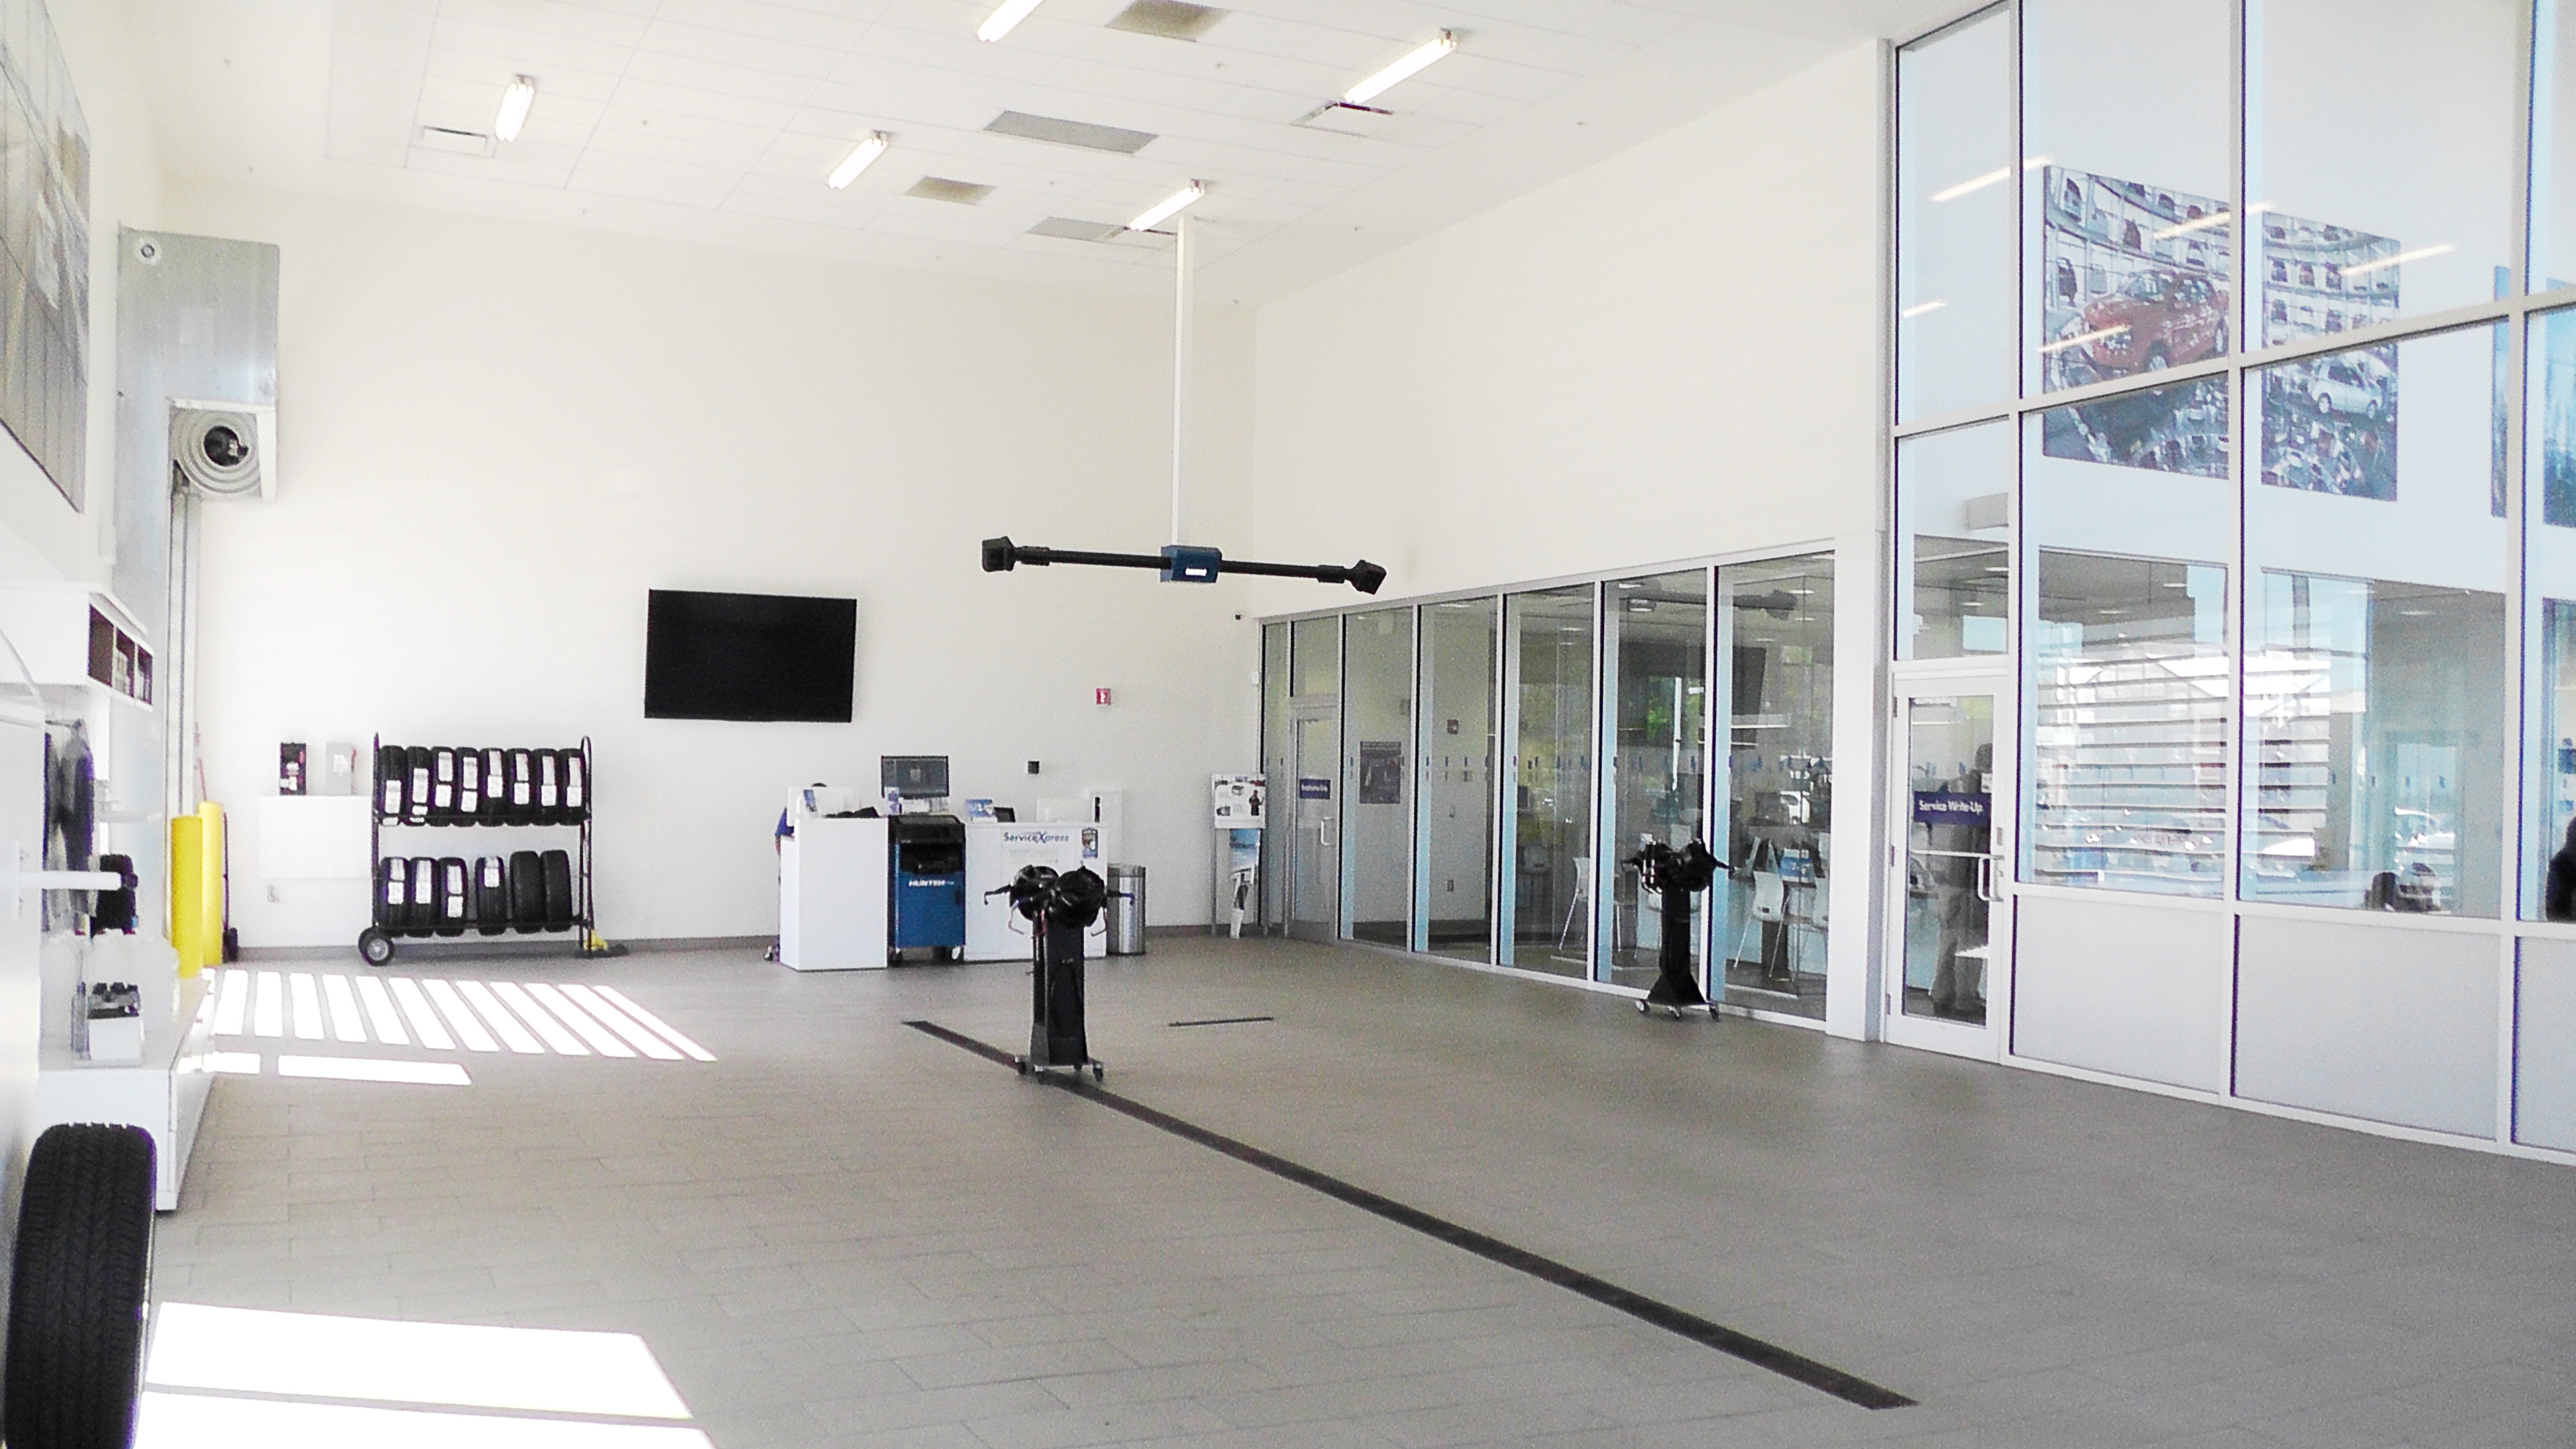 As you enter our Kelly Volkswagen service drive, you'll experience the best VW service you've ever had. Our climate controlled service center will make you feel cozy as one of our service attendants addresses your needs. The technology on display in our service drive is second to none.